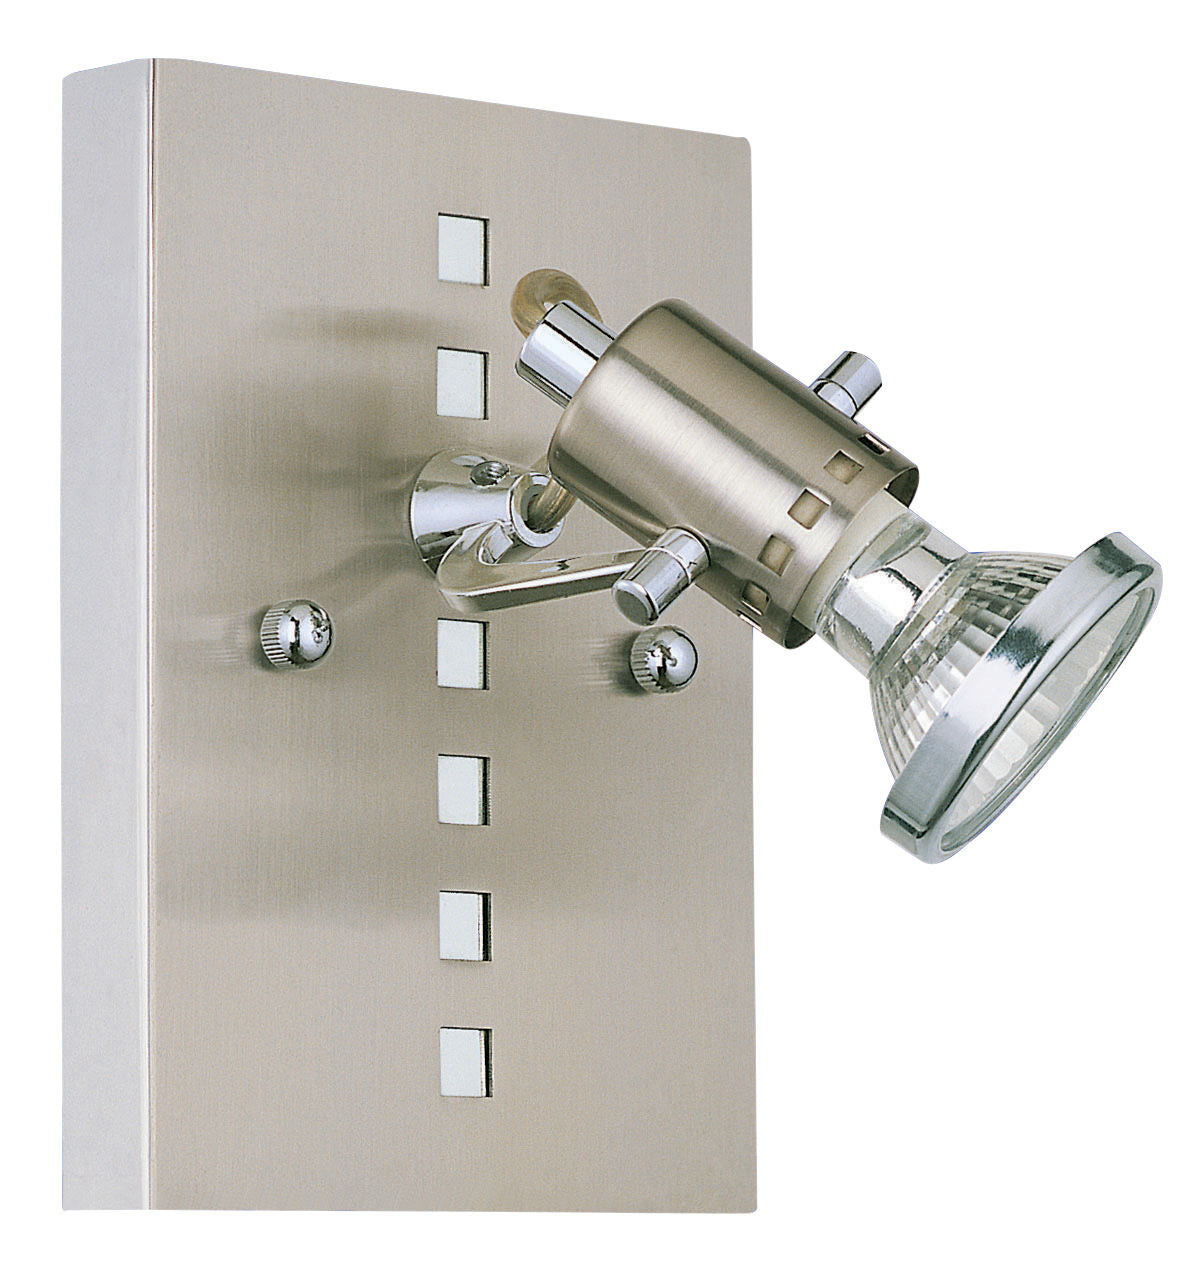 Fizz Sconce Chrome, Stainless steel - 82242A | EGLO